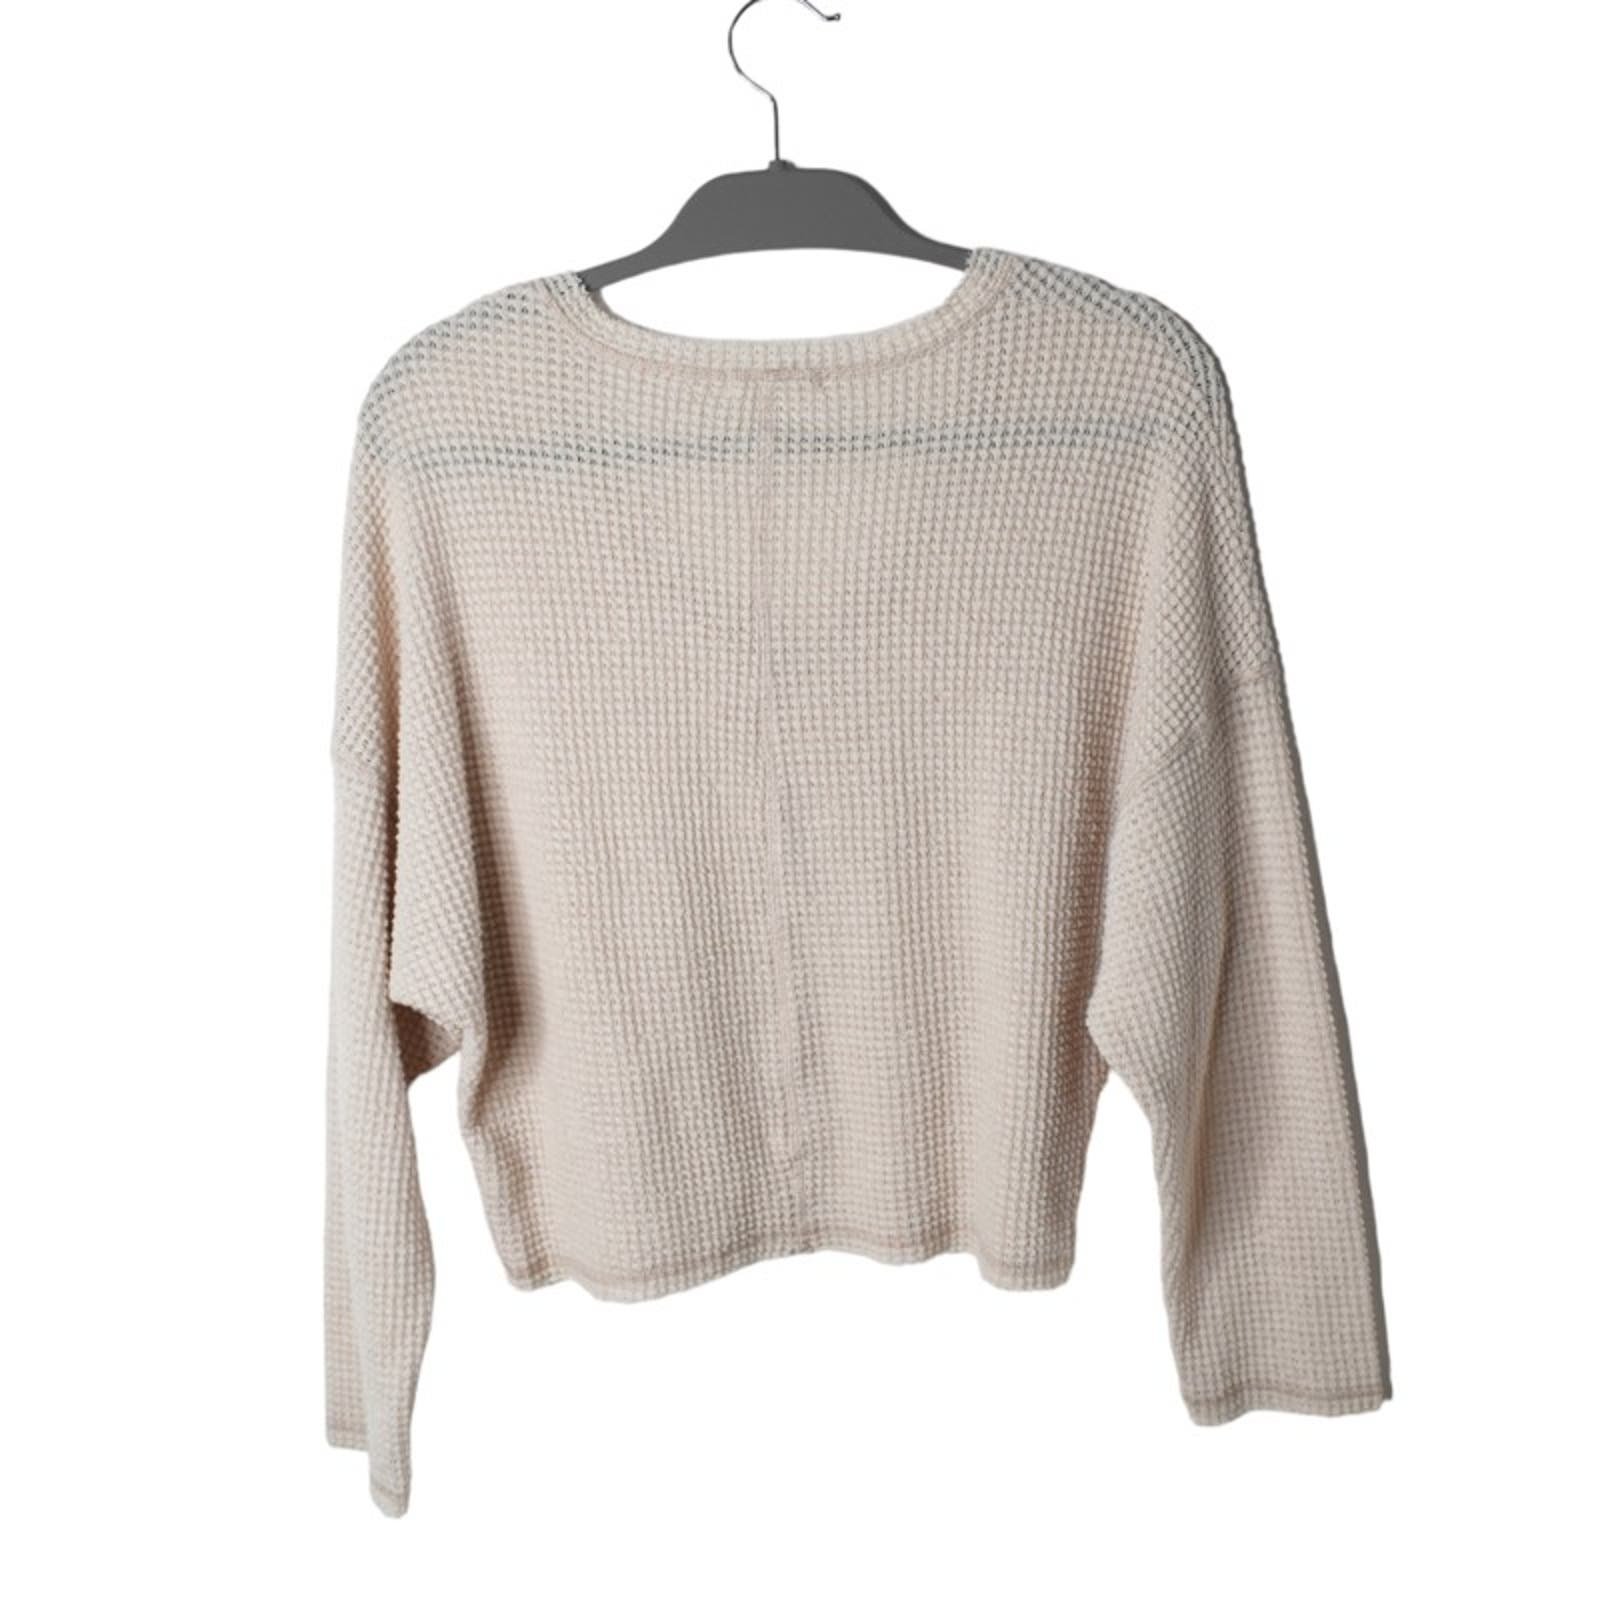 high discount Mod Ref Pullover Sweater Women´s S Cream Ivory Long Sleeve V Neck Waffle Knit Majr4sW5y on sale